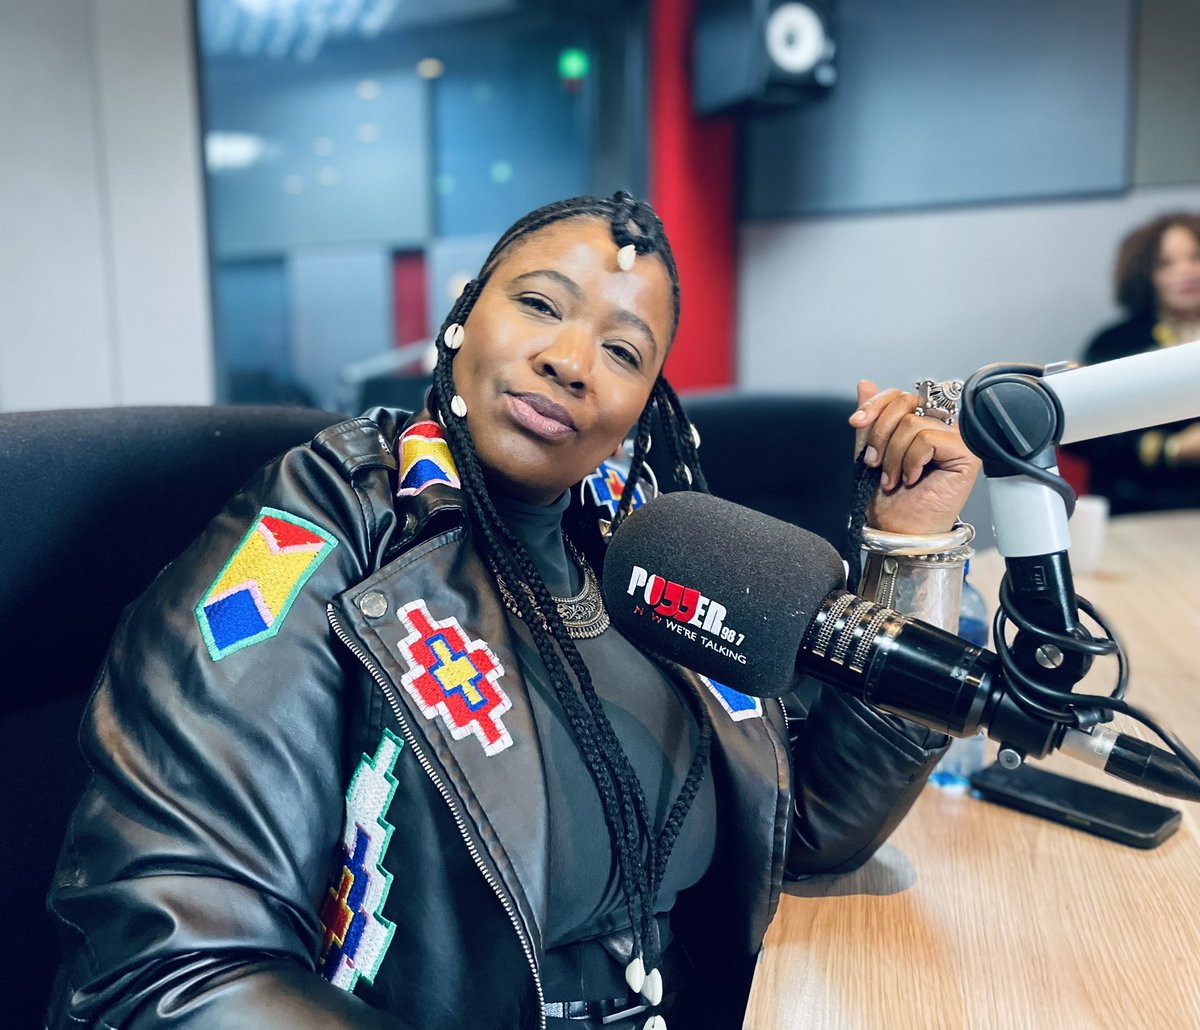 [ON AIR] The Musical Odyssey of Sankofa with Thandiswa Mazwai @mbele_lnb is in conversation with the Award-Winning Singer and Songwriter @thandiswamazwai. #POWERTalk